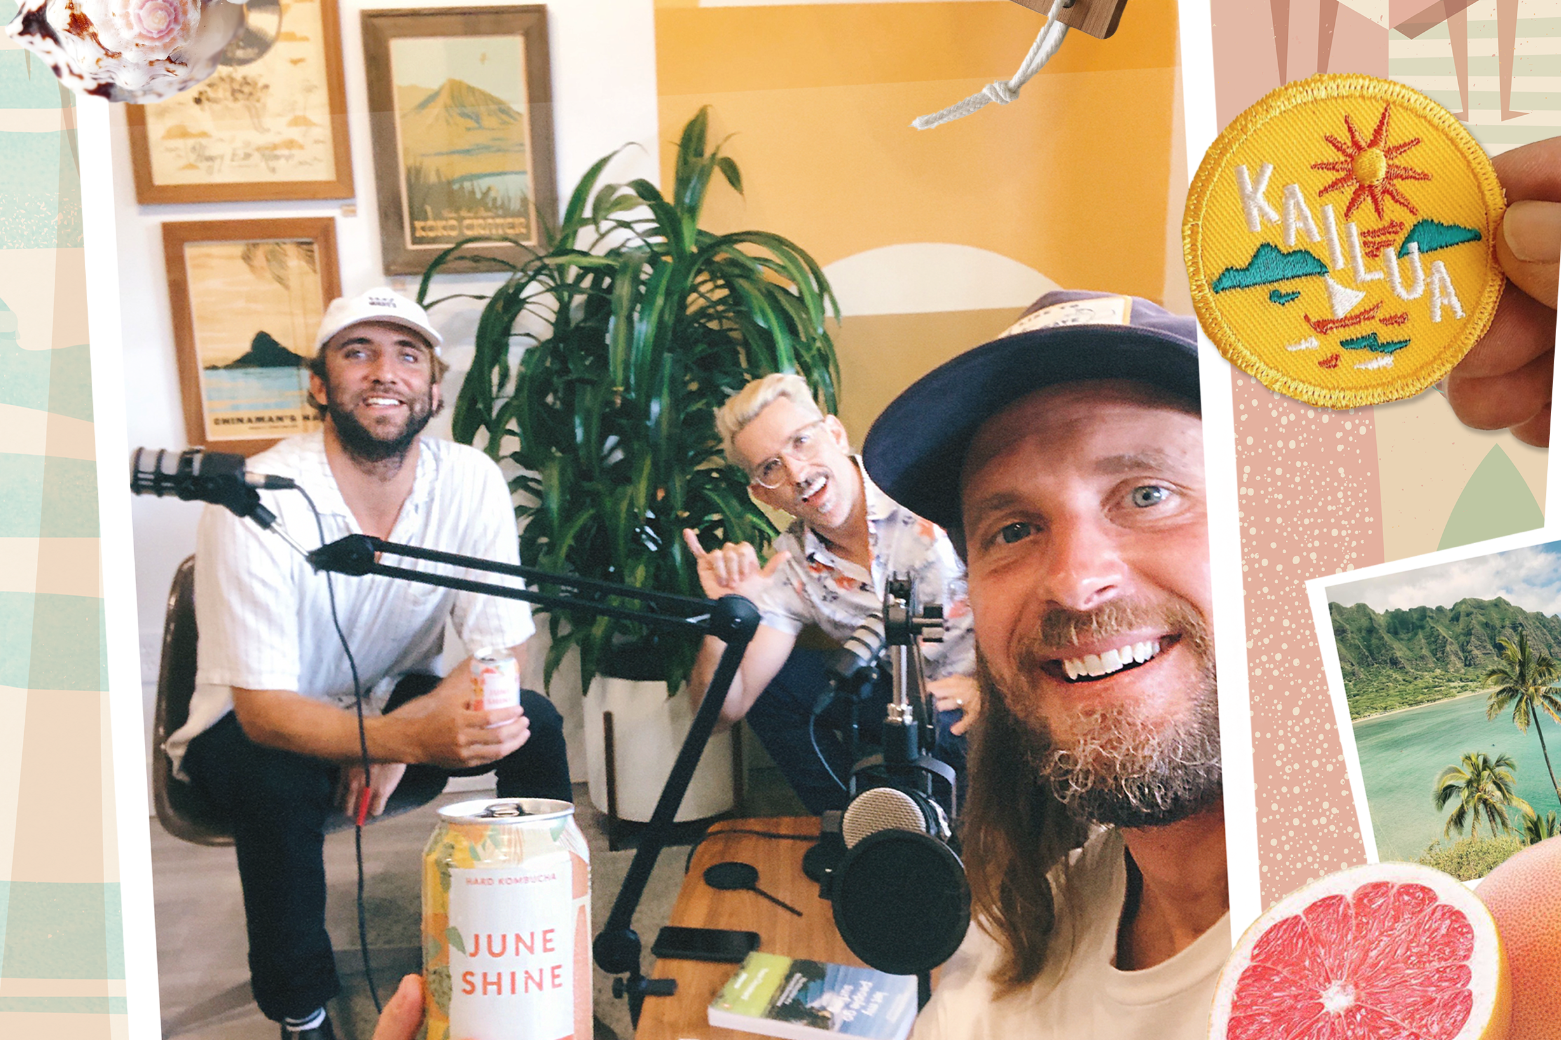 Brewing Passion into Success: JuneShine Co-Founder Forrest Dein talks story with Artist Nick Kuchar